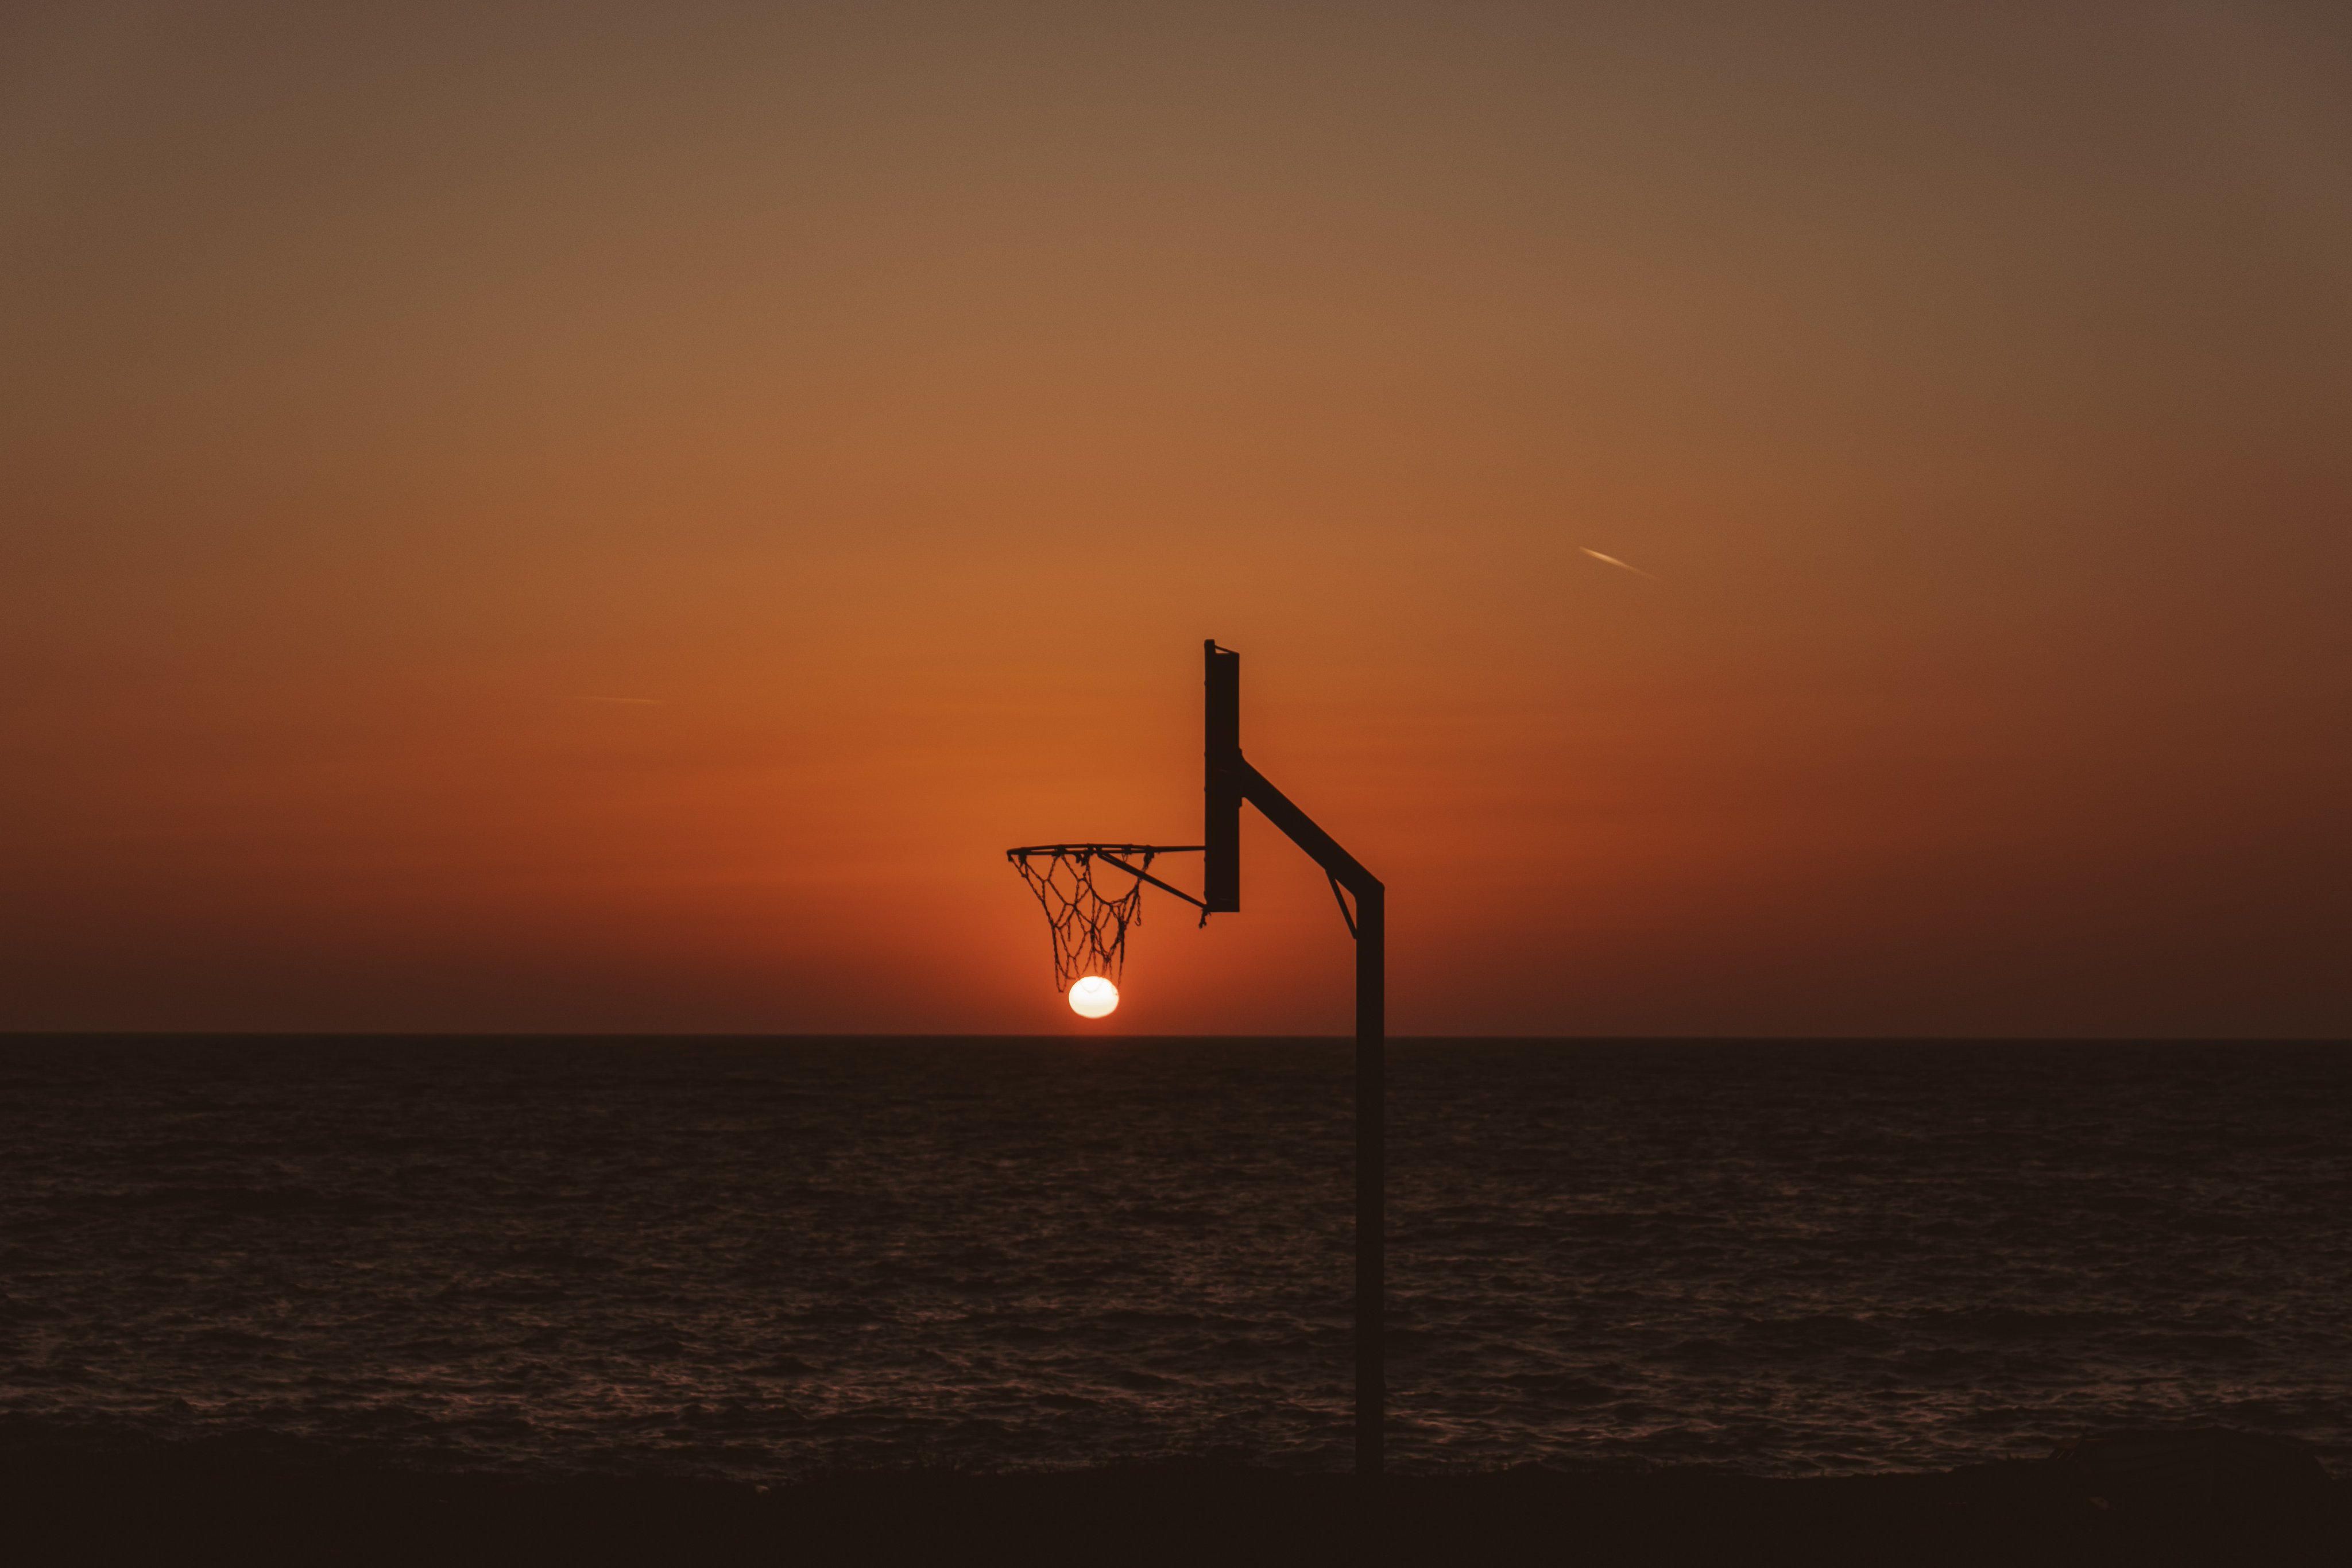 4K Basketball Wallpaper and Background Image